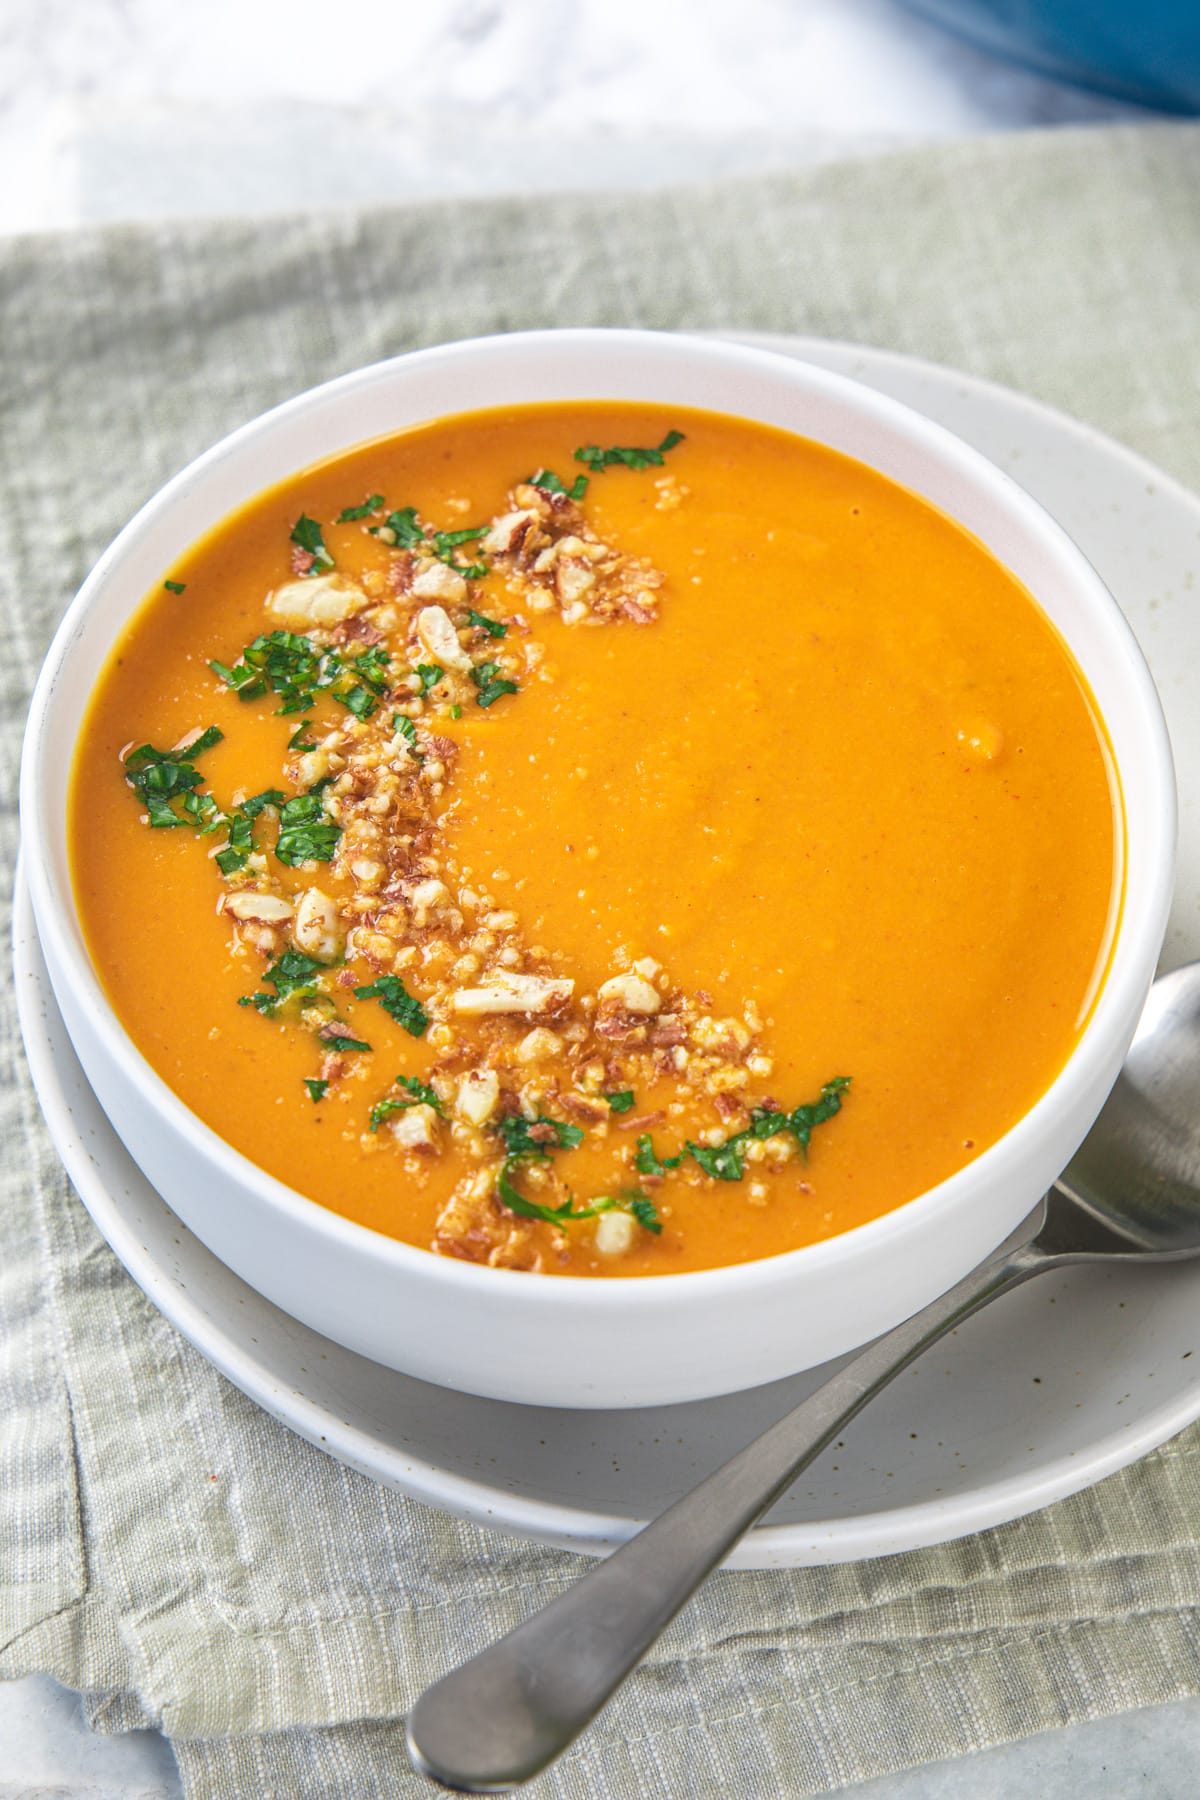 A bowl of curried pumpkin soup garnished with cilantro and crushed peanuts.